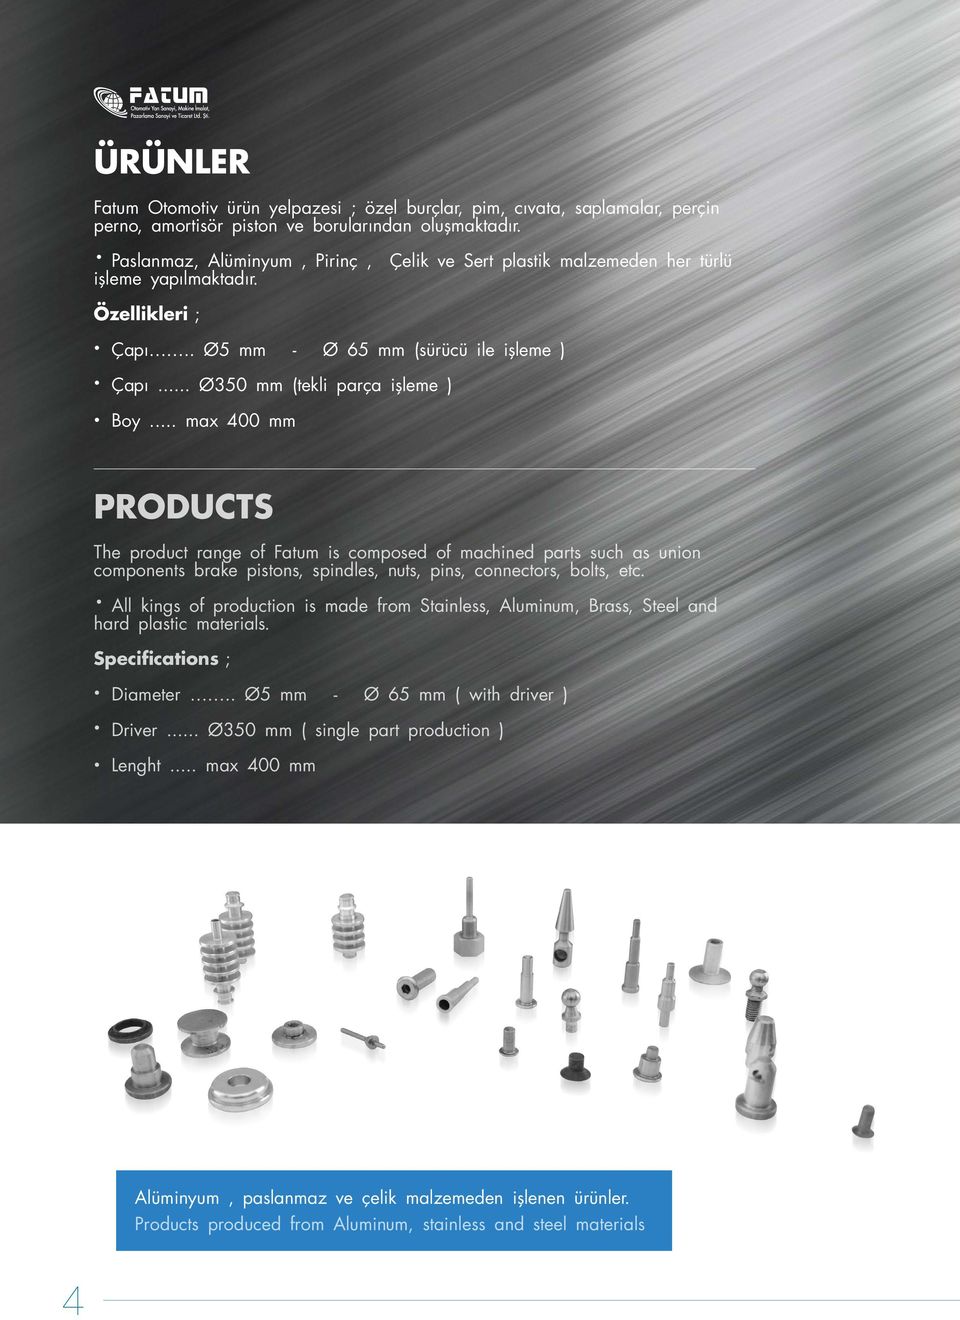 .. max 400 mm PRODUCTS The product range of Fatum is composed of machined parts such as union components brake pistons, spindles, nuts, pins, connectors, bolts, etc.